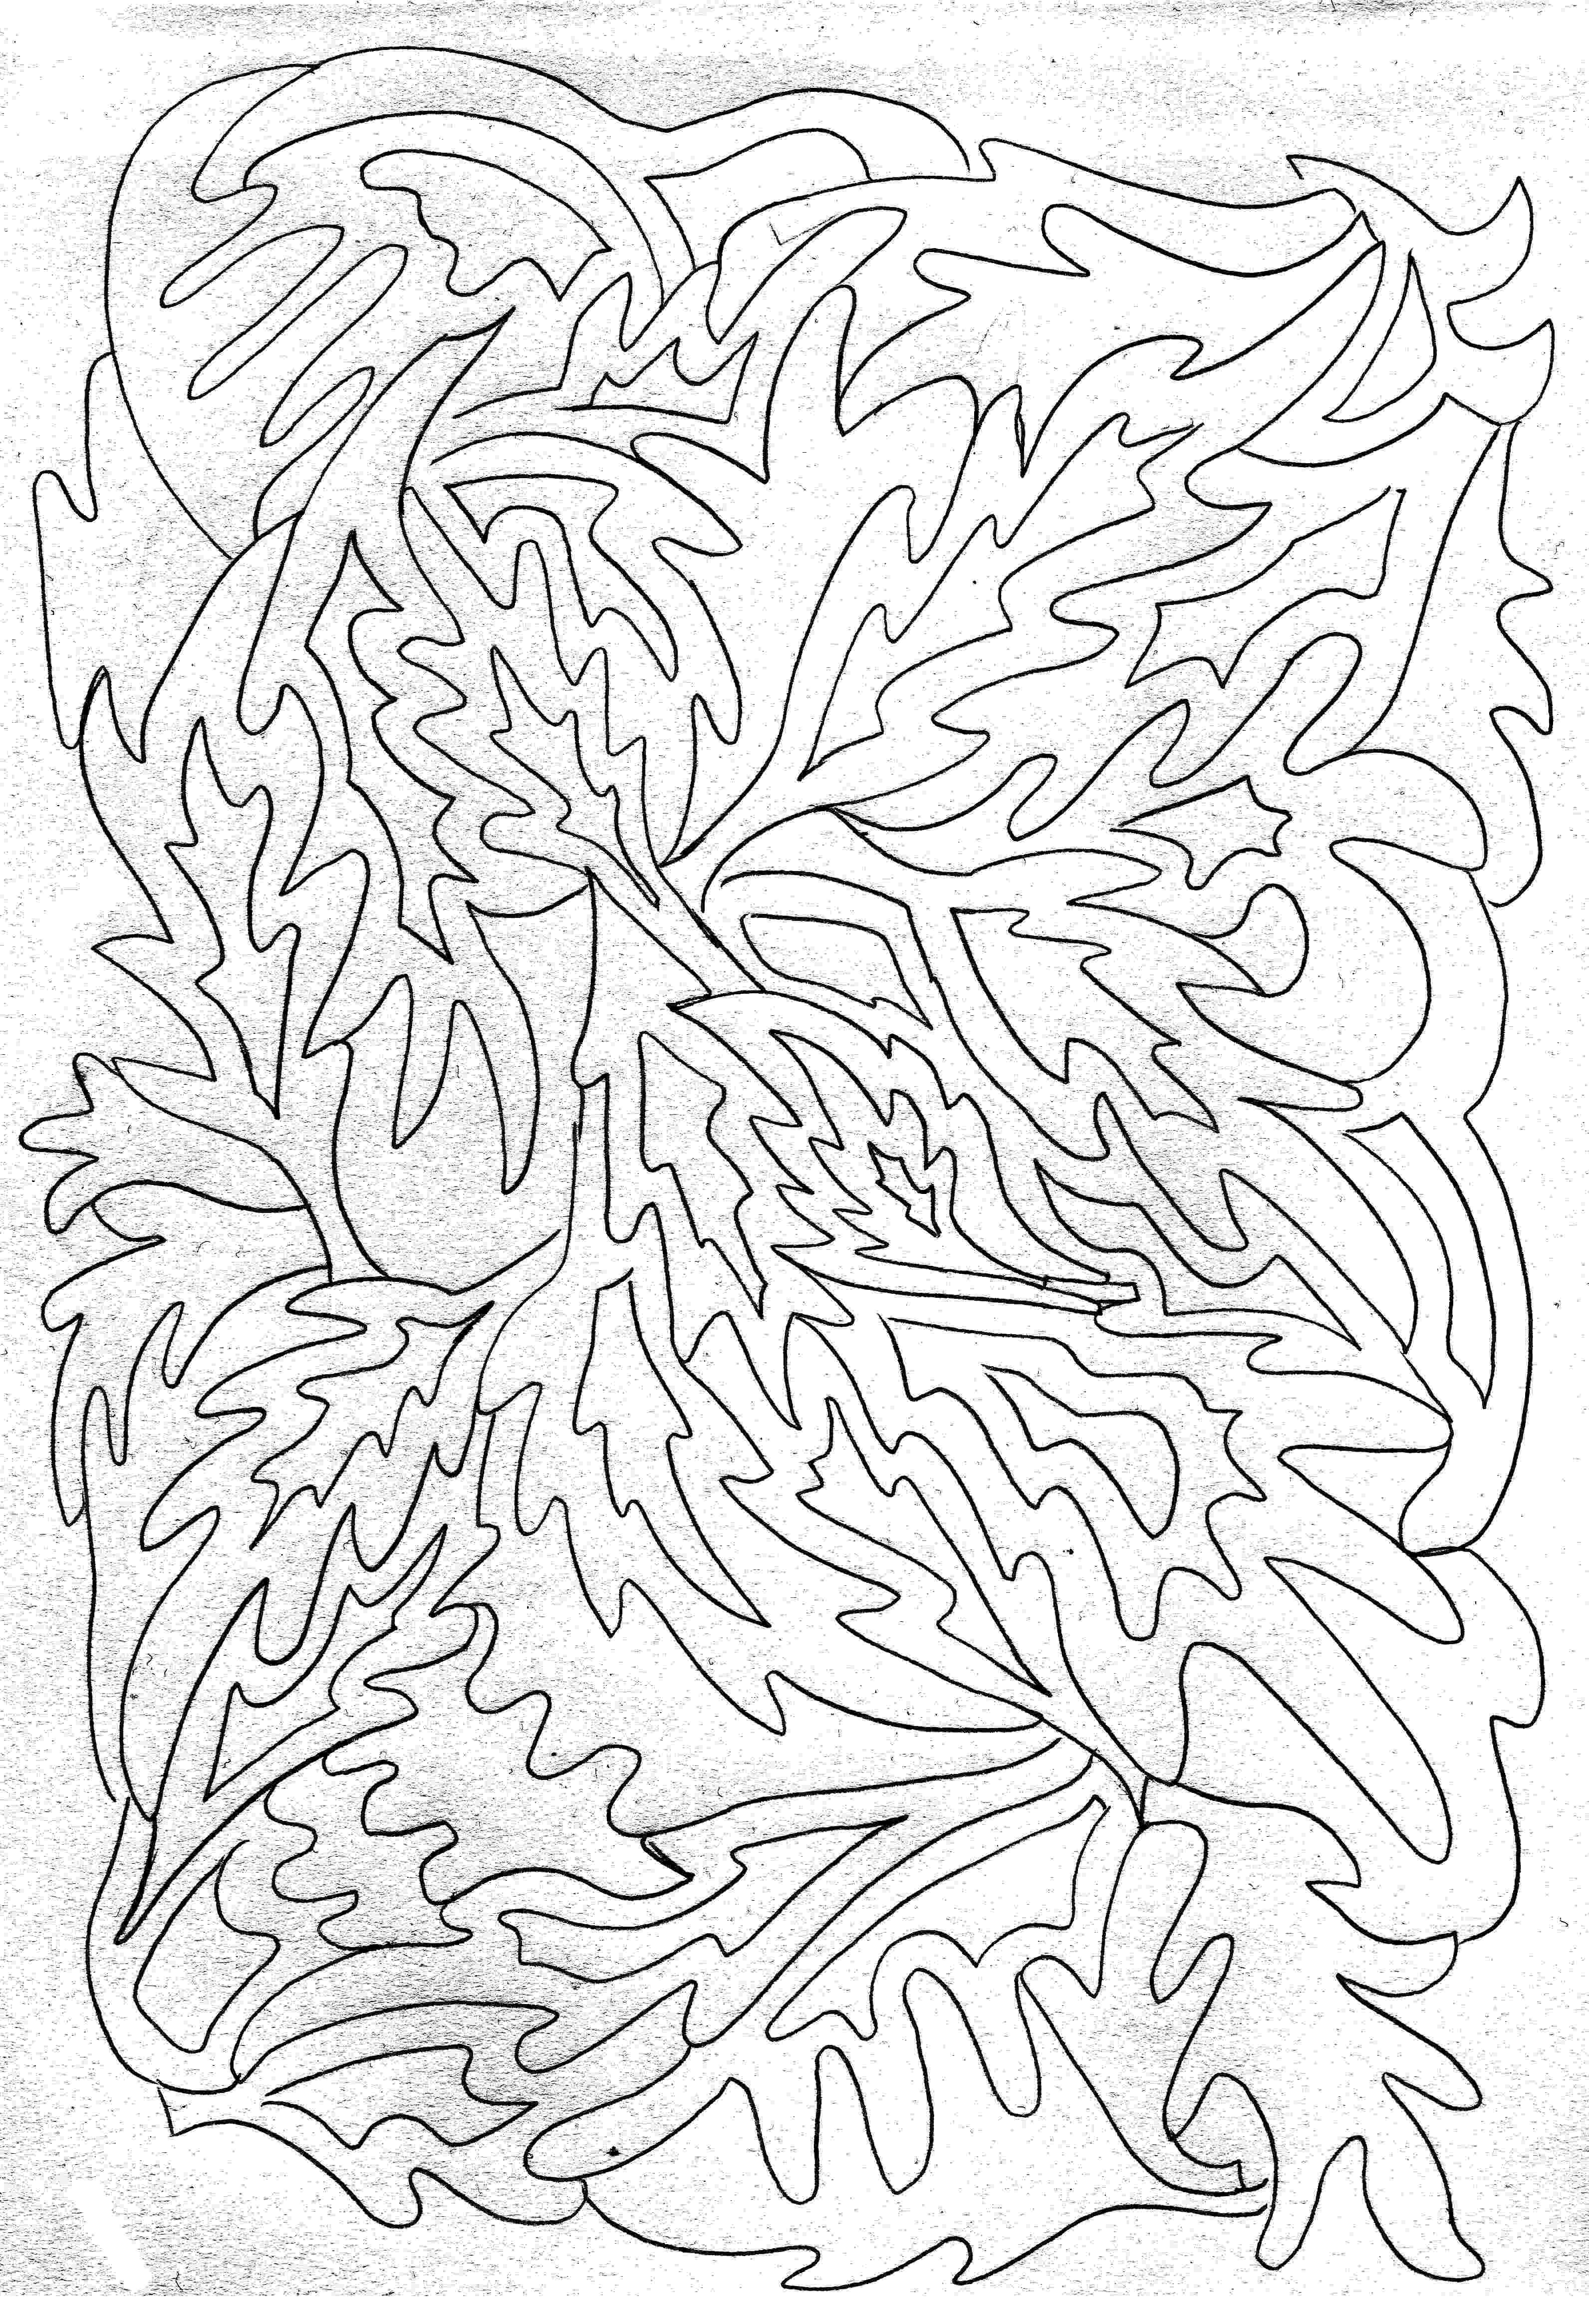 colouring pages patterns oodles of doodles january 2012 colouring patterns pages 